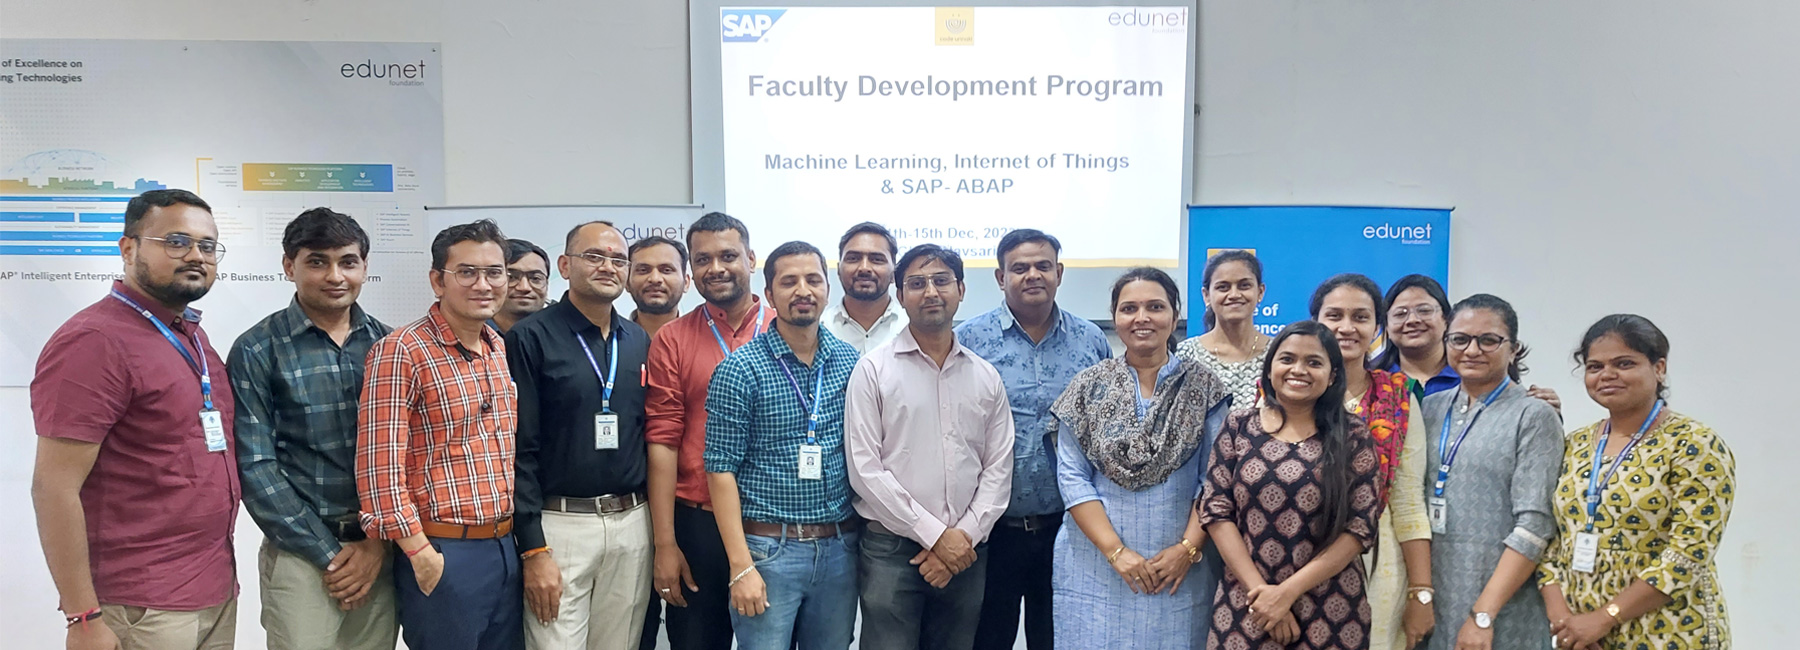 Participants at a Faculty Development Workshop organised under the Program